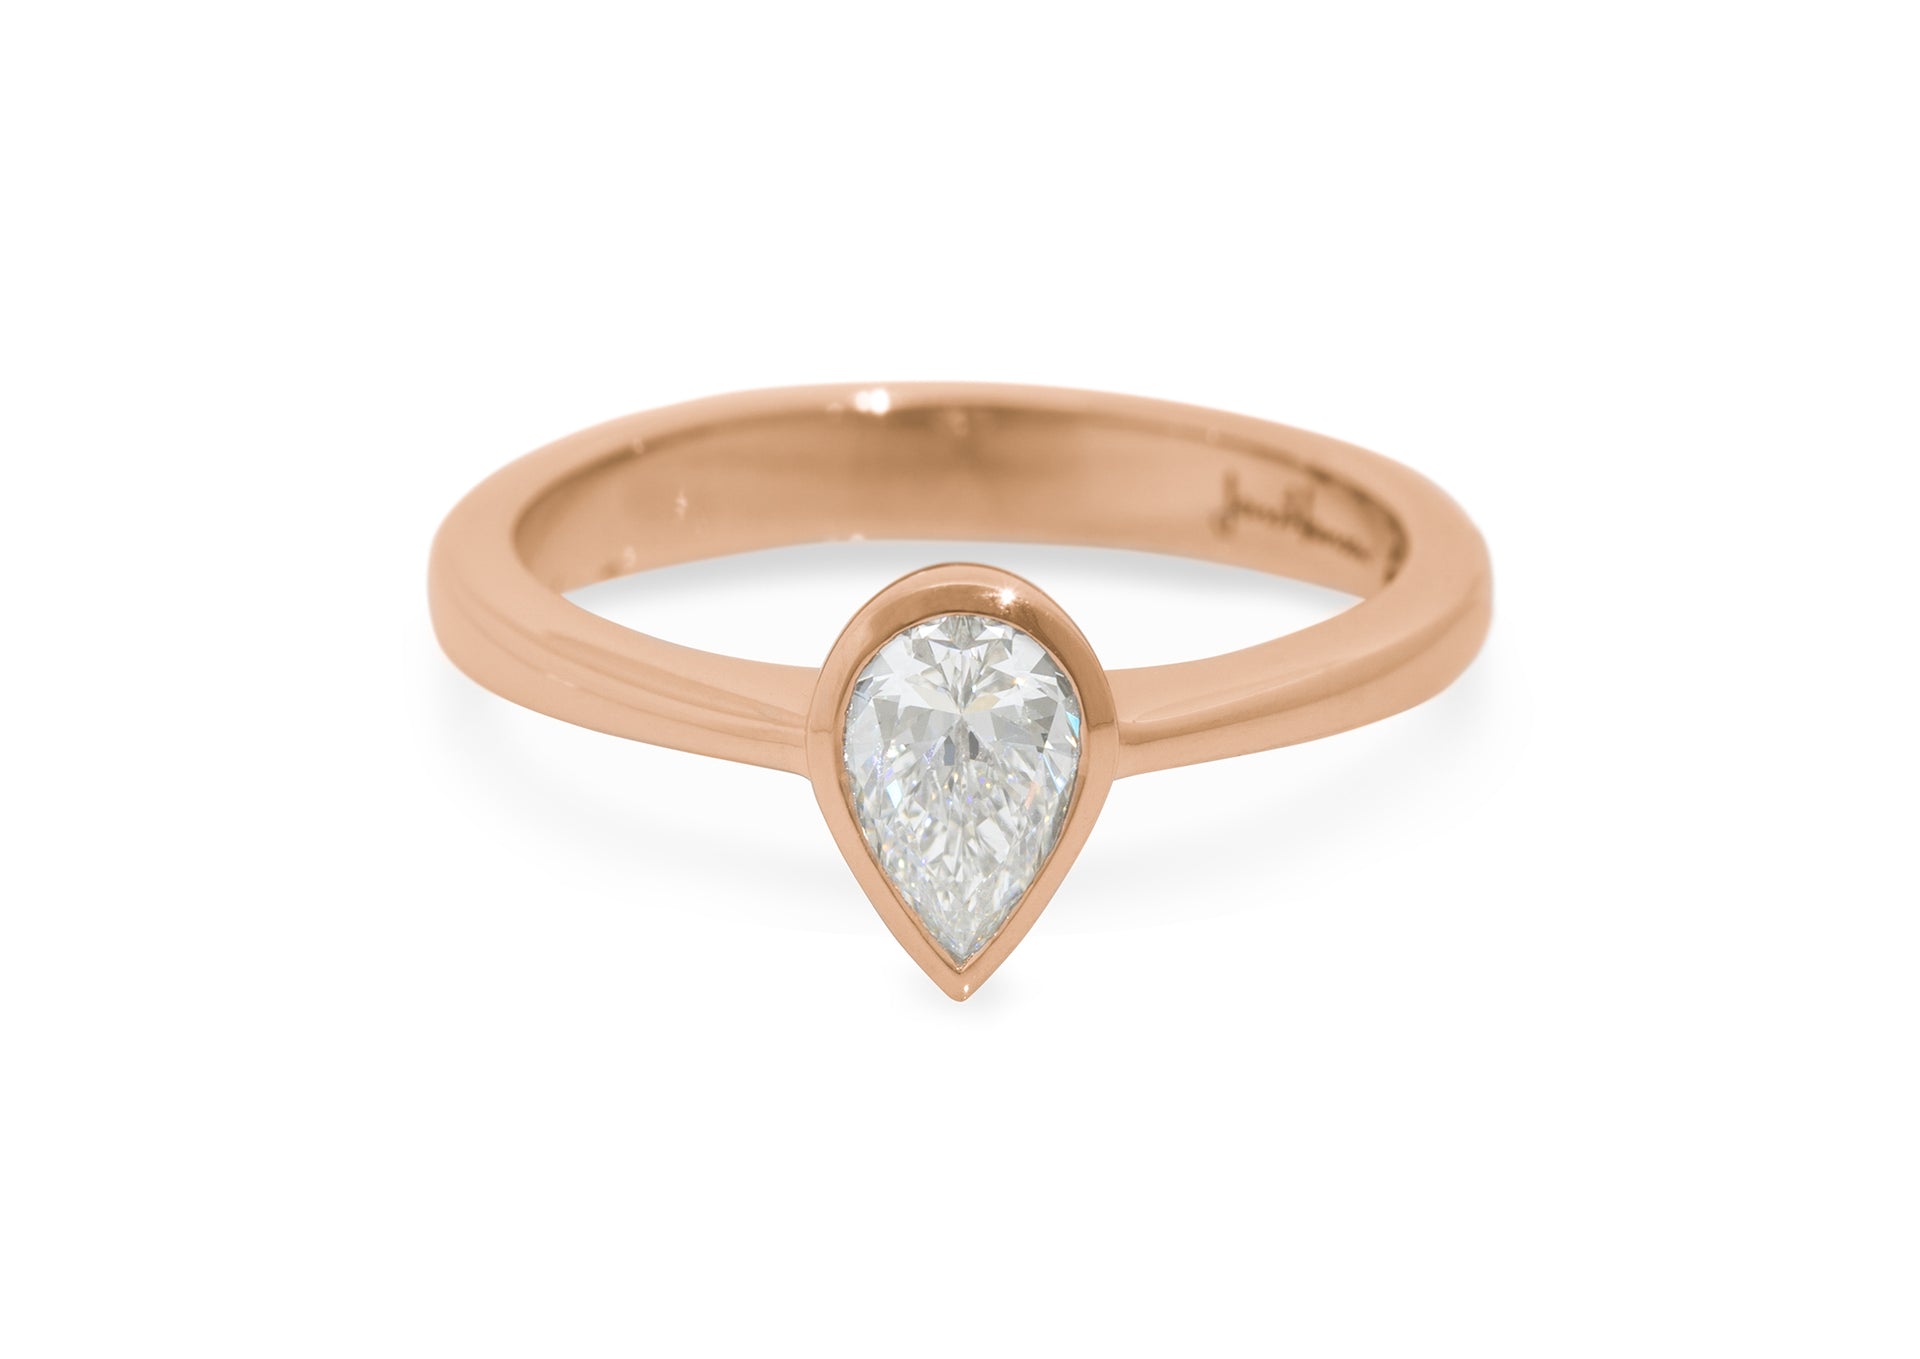 Pear Shaped Diamond Engagement Ring, Red Gold